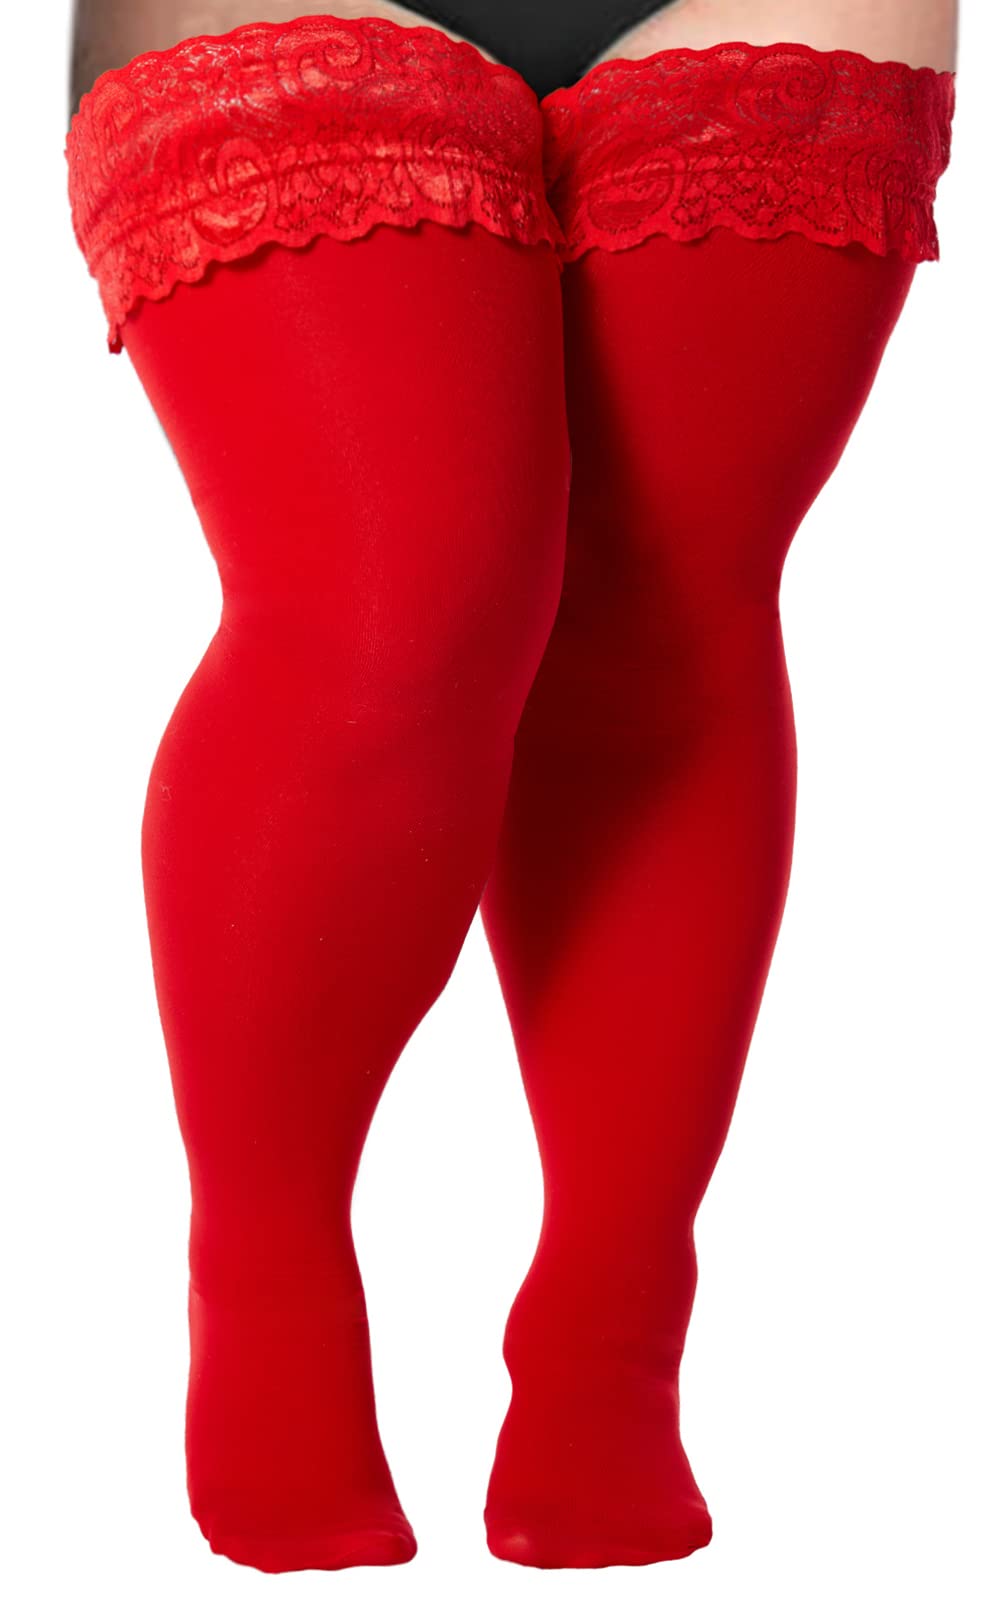 55D Semi Sheer Silicone Lace Stay Up Thigh Highs Pantyhose-Red - Moon Wood